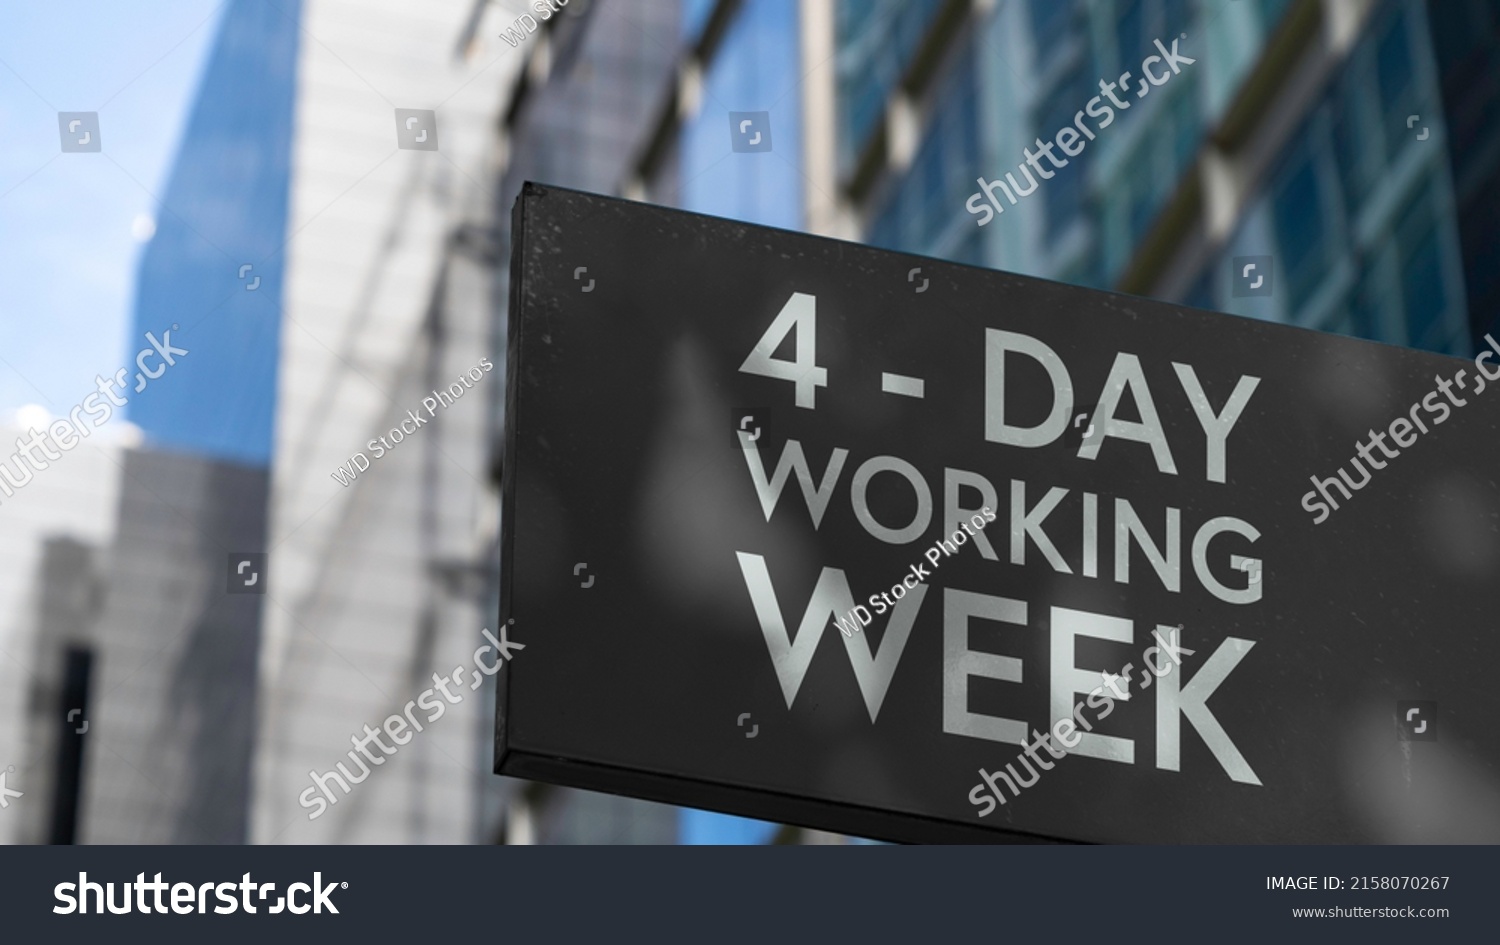 4 - Day working week on a black city-center sign in front of a modern office building	 #2158070267